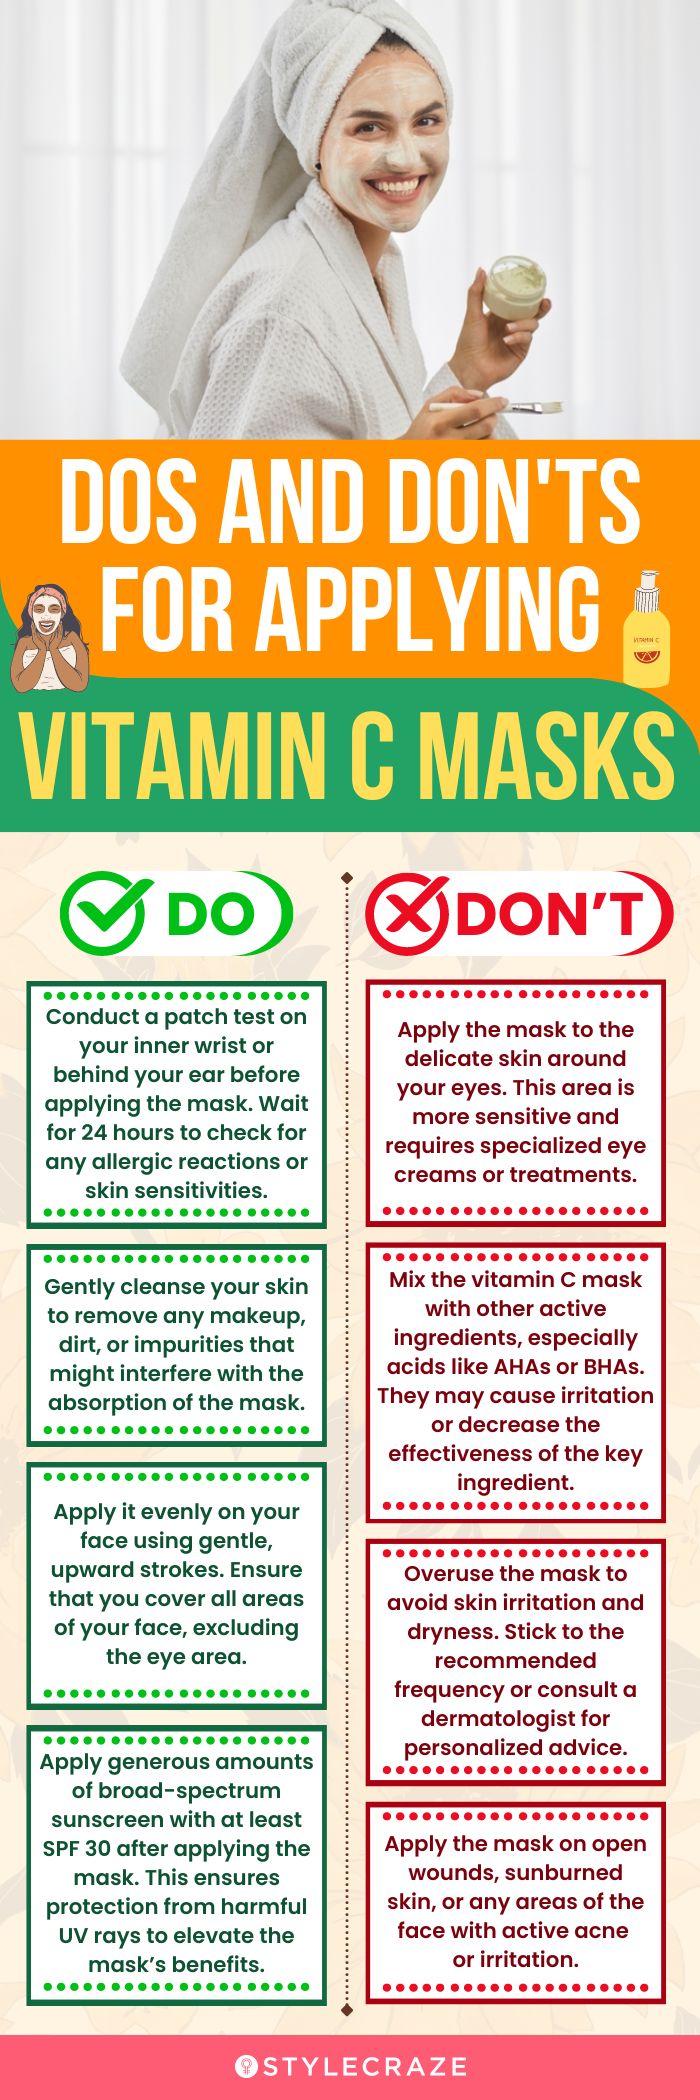  Dos And Don'ts For Applying Vitamin C Masks (infographic)